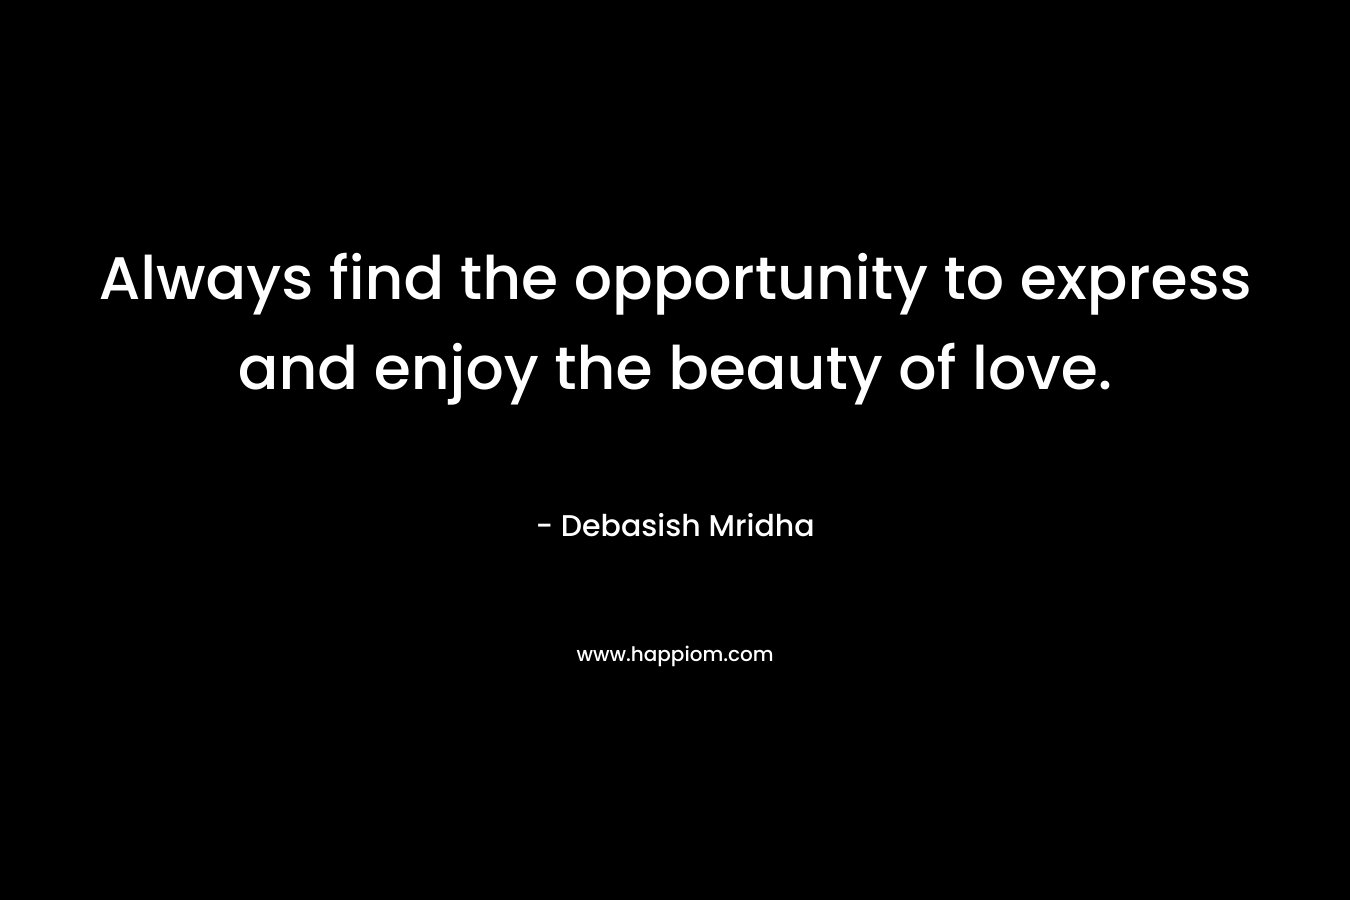 Always find the opportunity to express and enjoy the beauty of love.